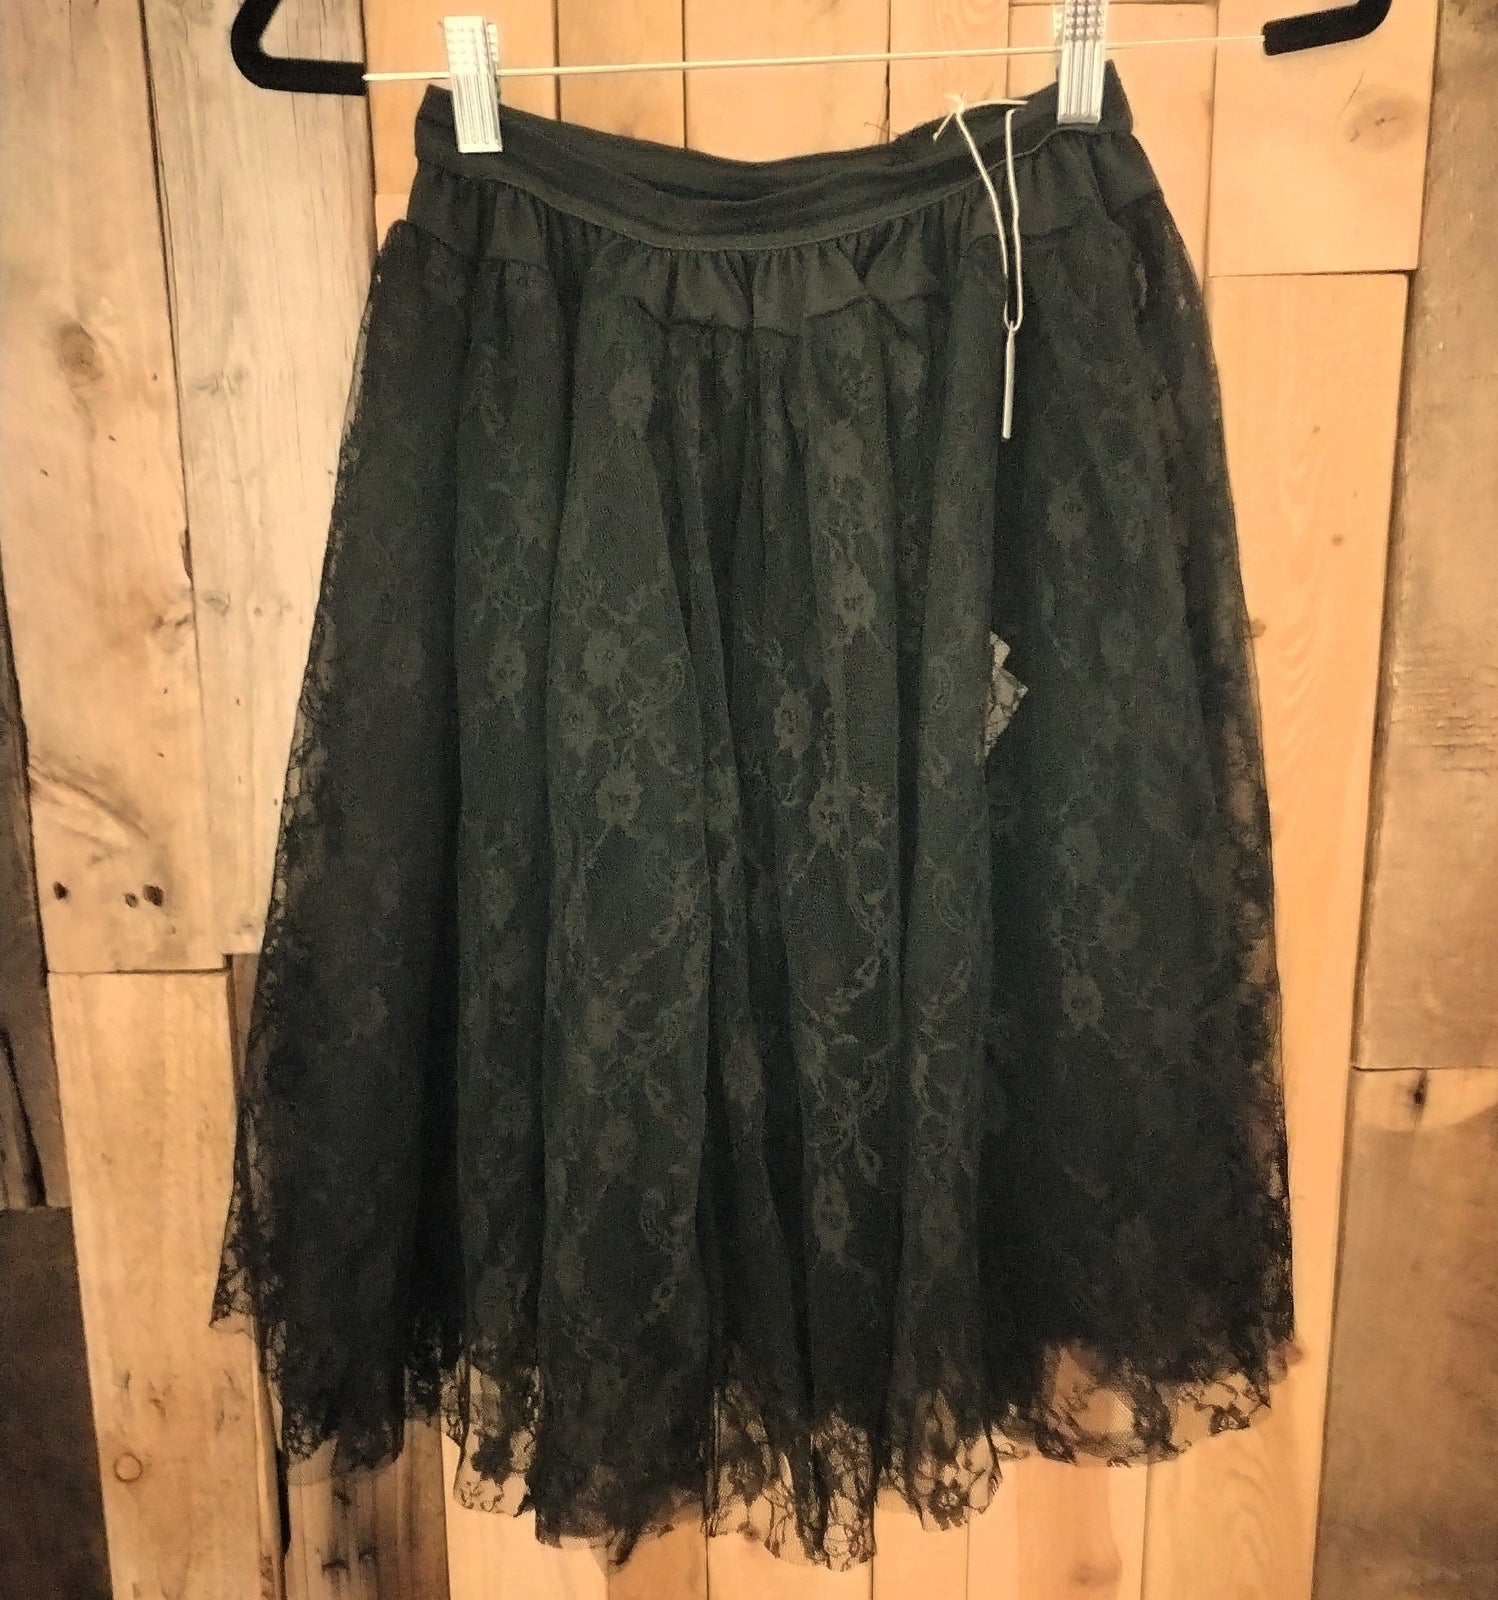 Black Lace Goth Skirt Size Small through Large